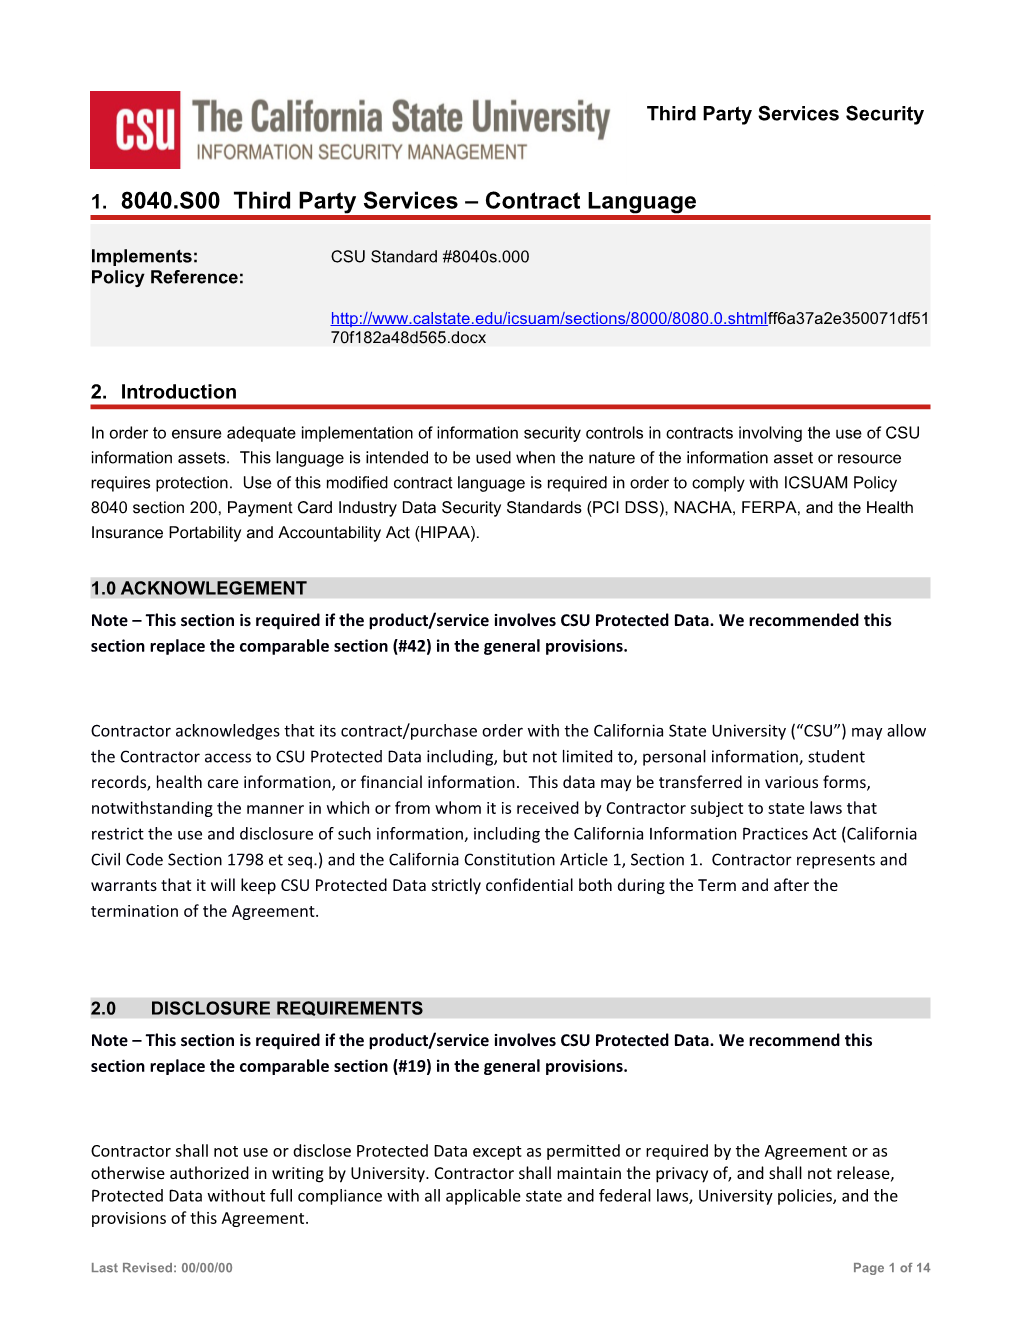 8040.S000 Third Party Contract Language